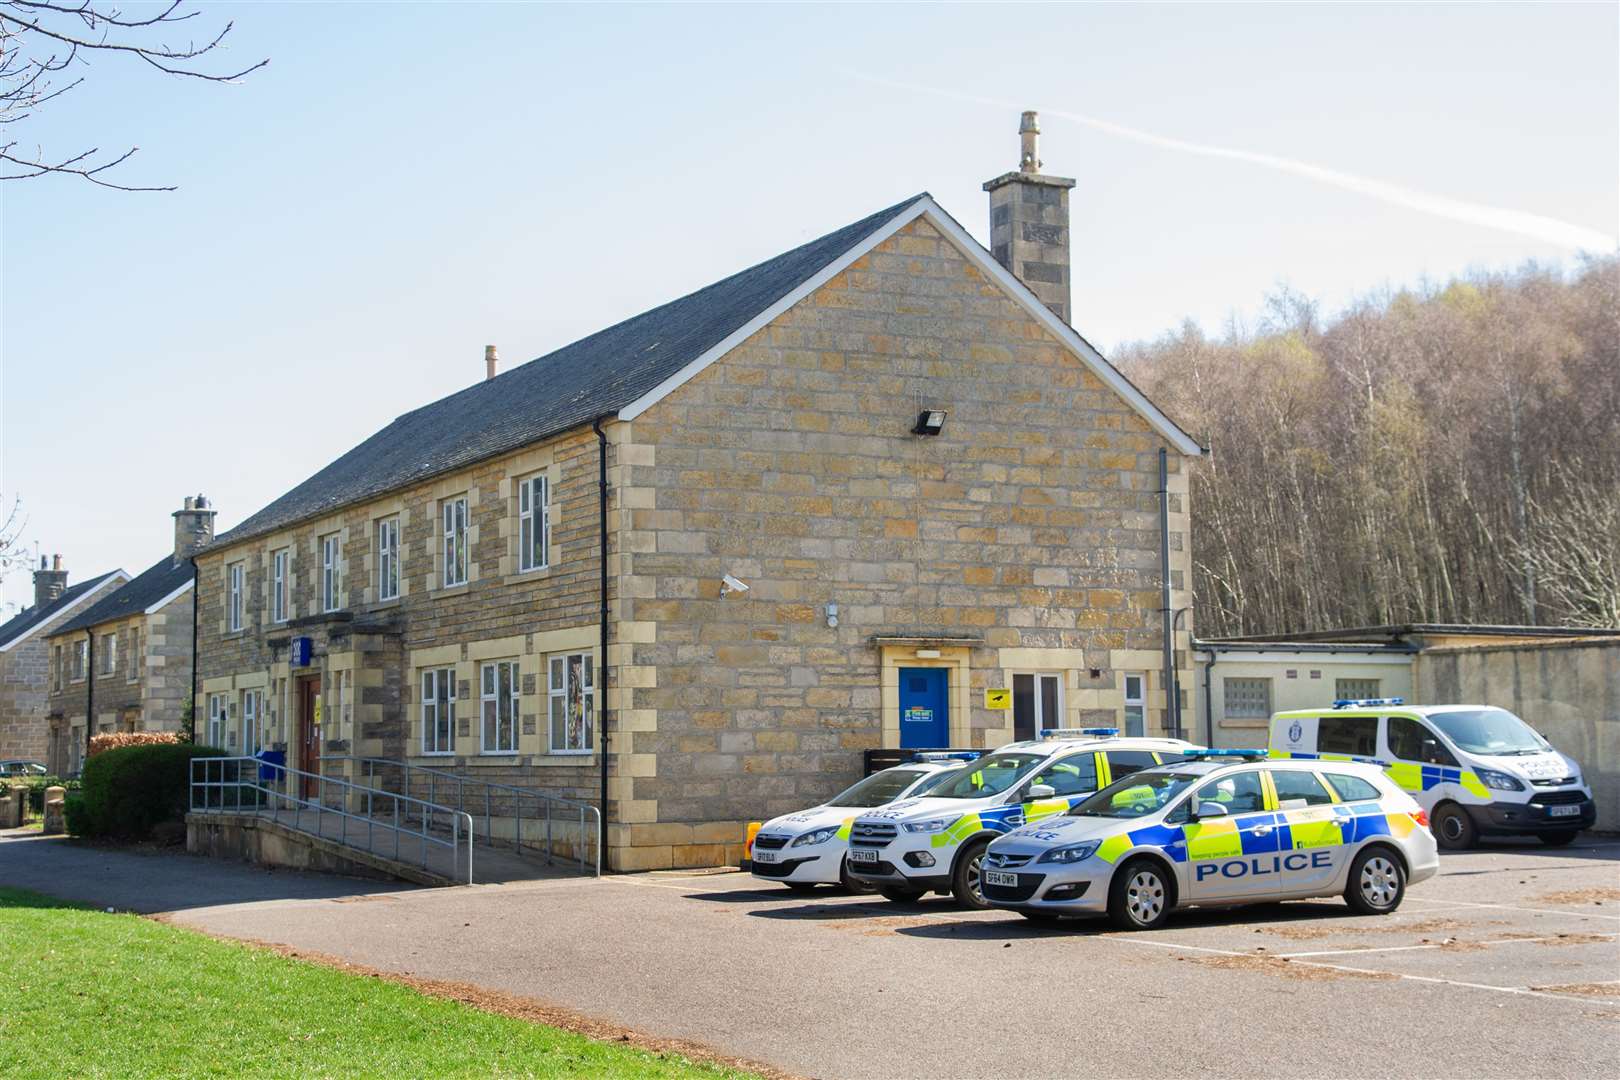 Forres Police Station's public counter is open from 9.15am-5.15pm, Monday to Thursday and 9.15-2.45pm on Fridays.